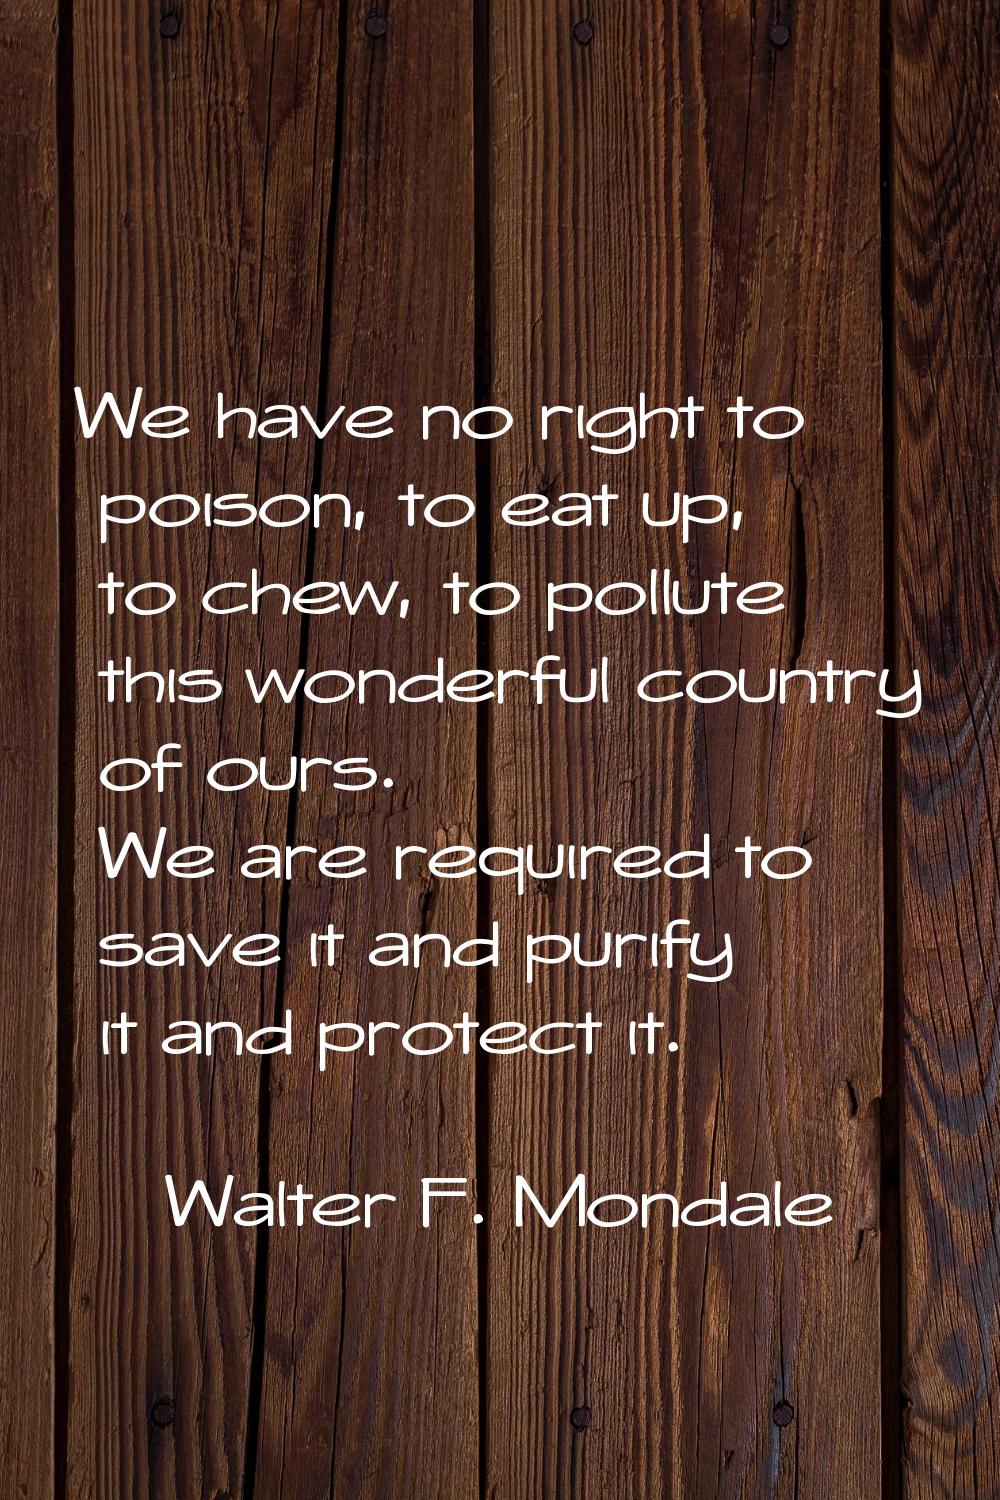 We have no right to poison, to eat up, to chew, to pollute this wonderful country of ours. We are r